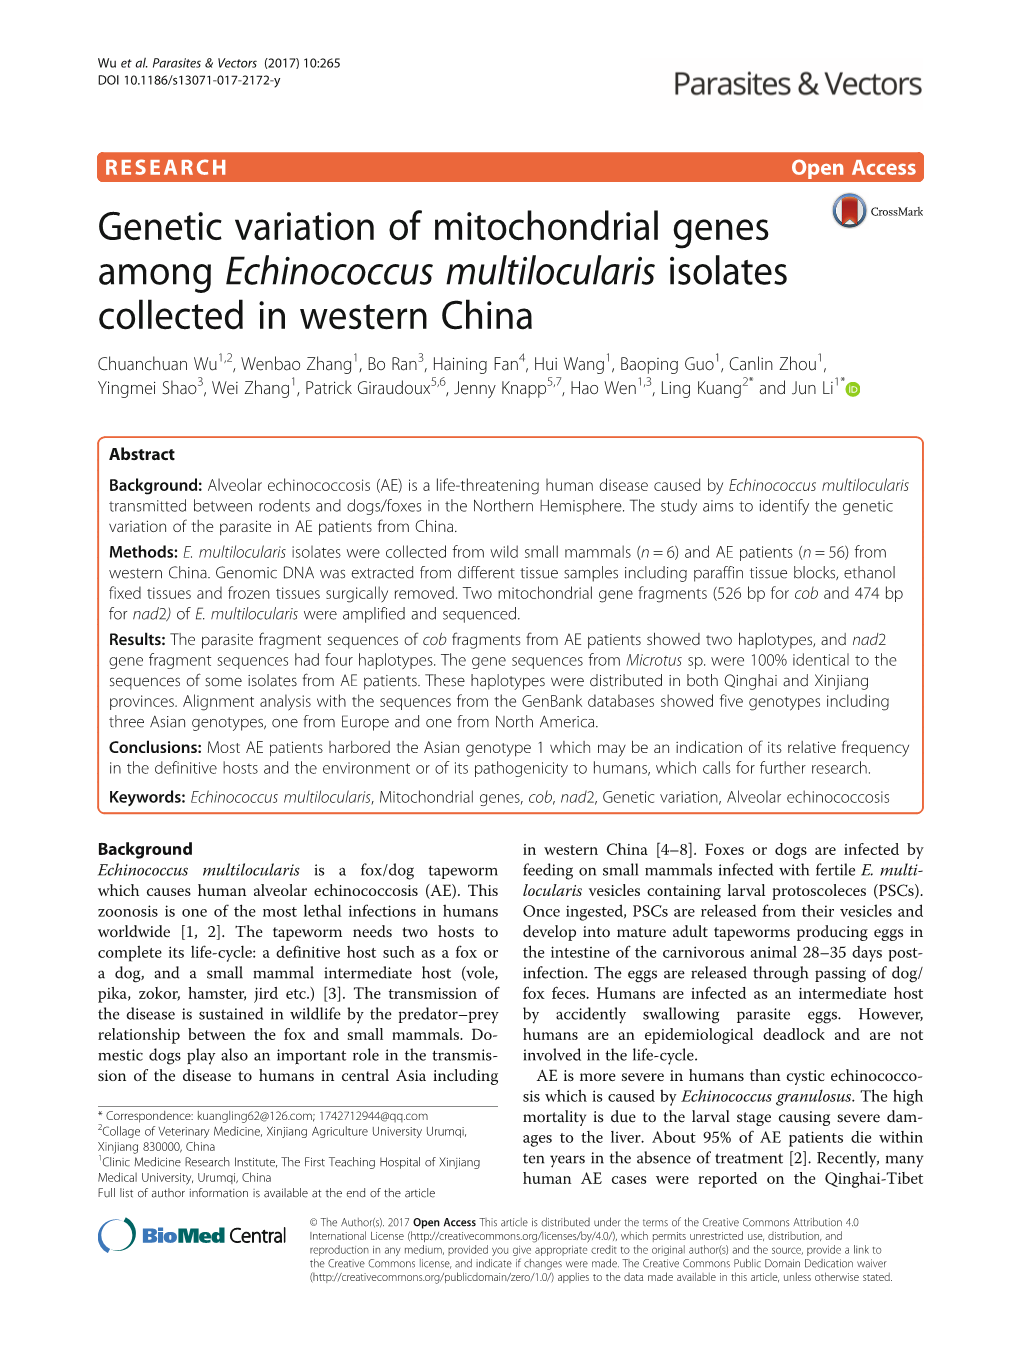 Genetic Variation of Mitochondrial Genes Among Echinococcus